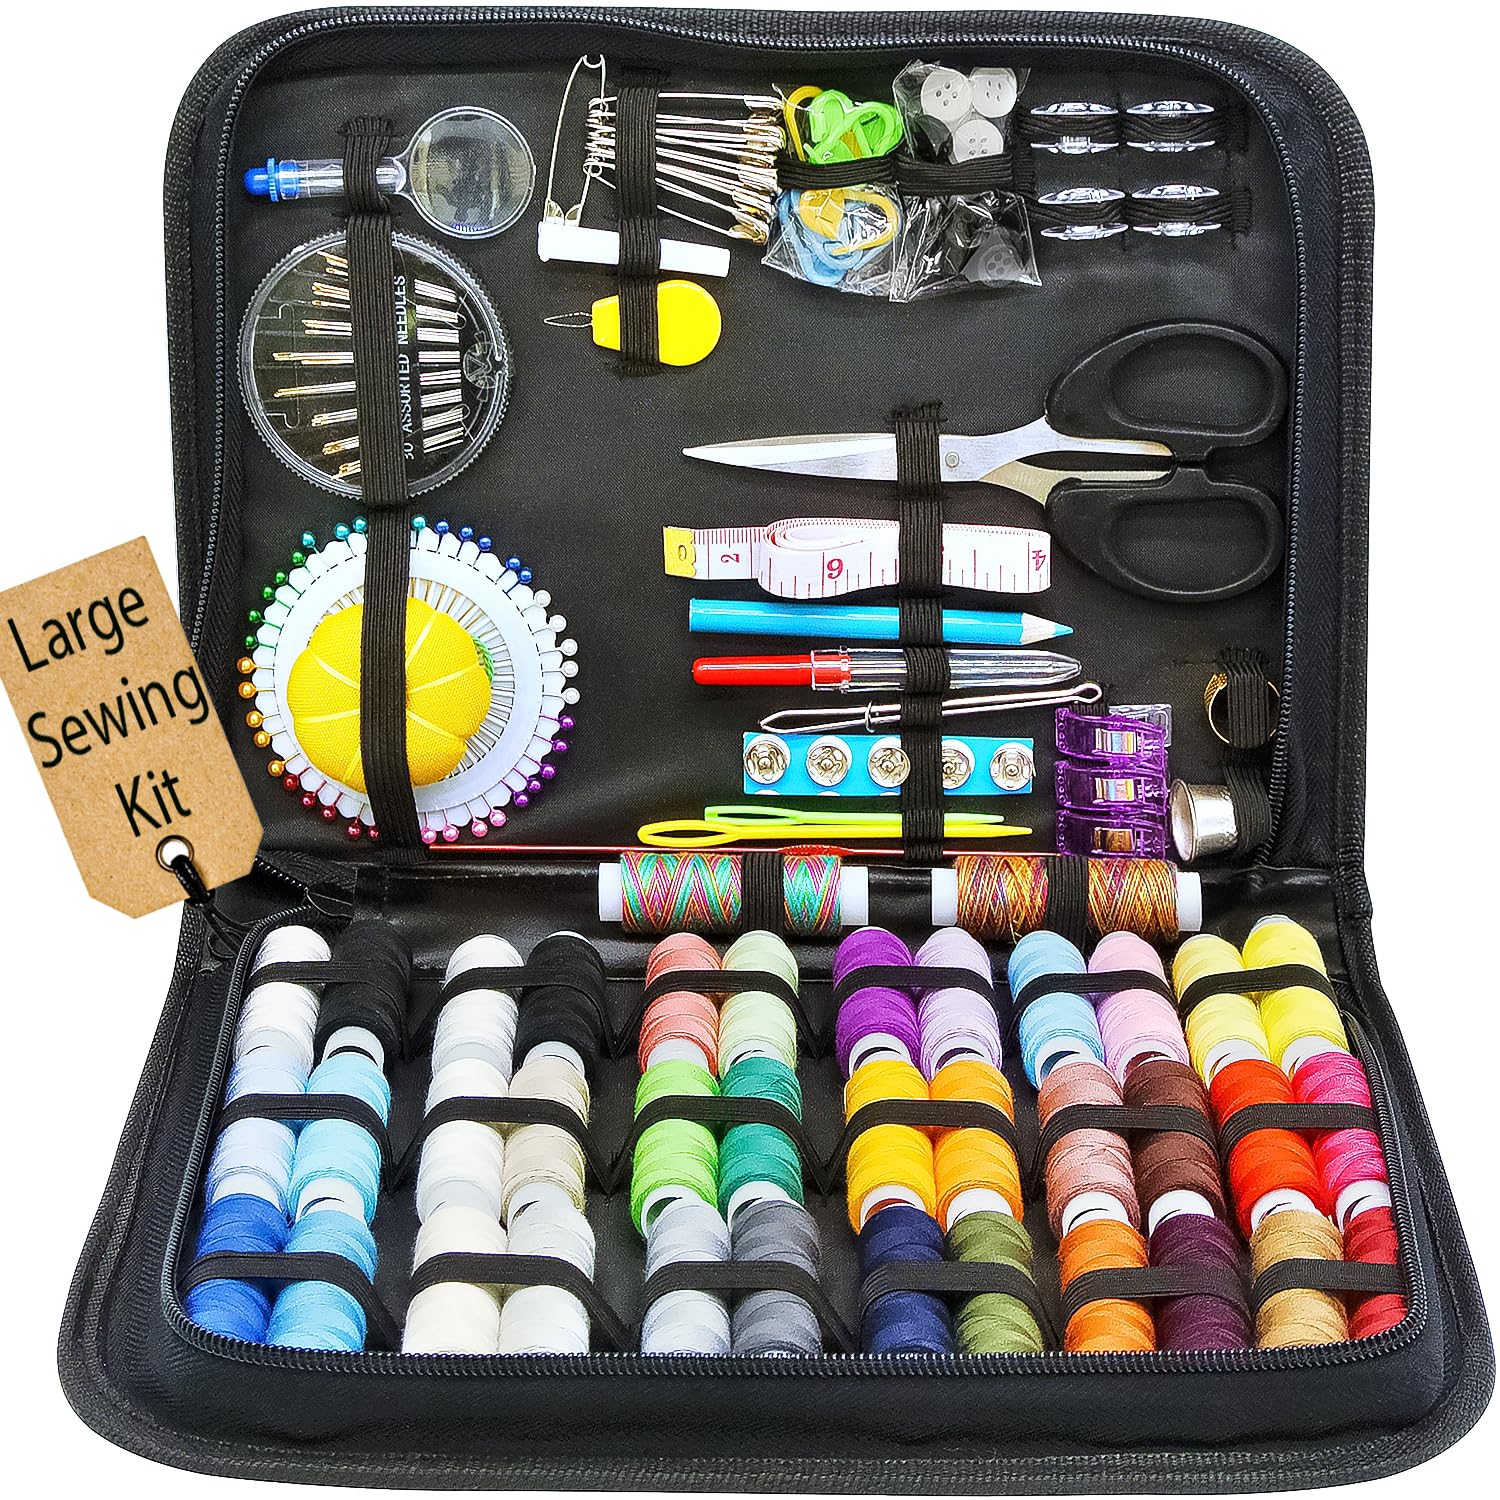 Vellostar Sewing Kit for Adults with Sewing Supplies and